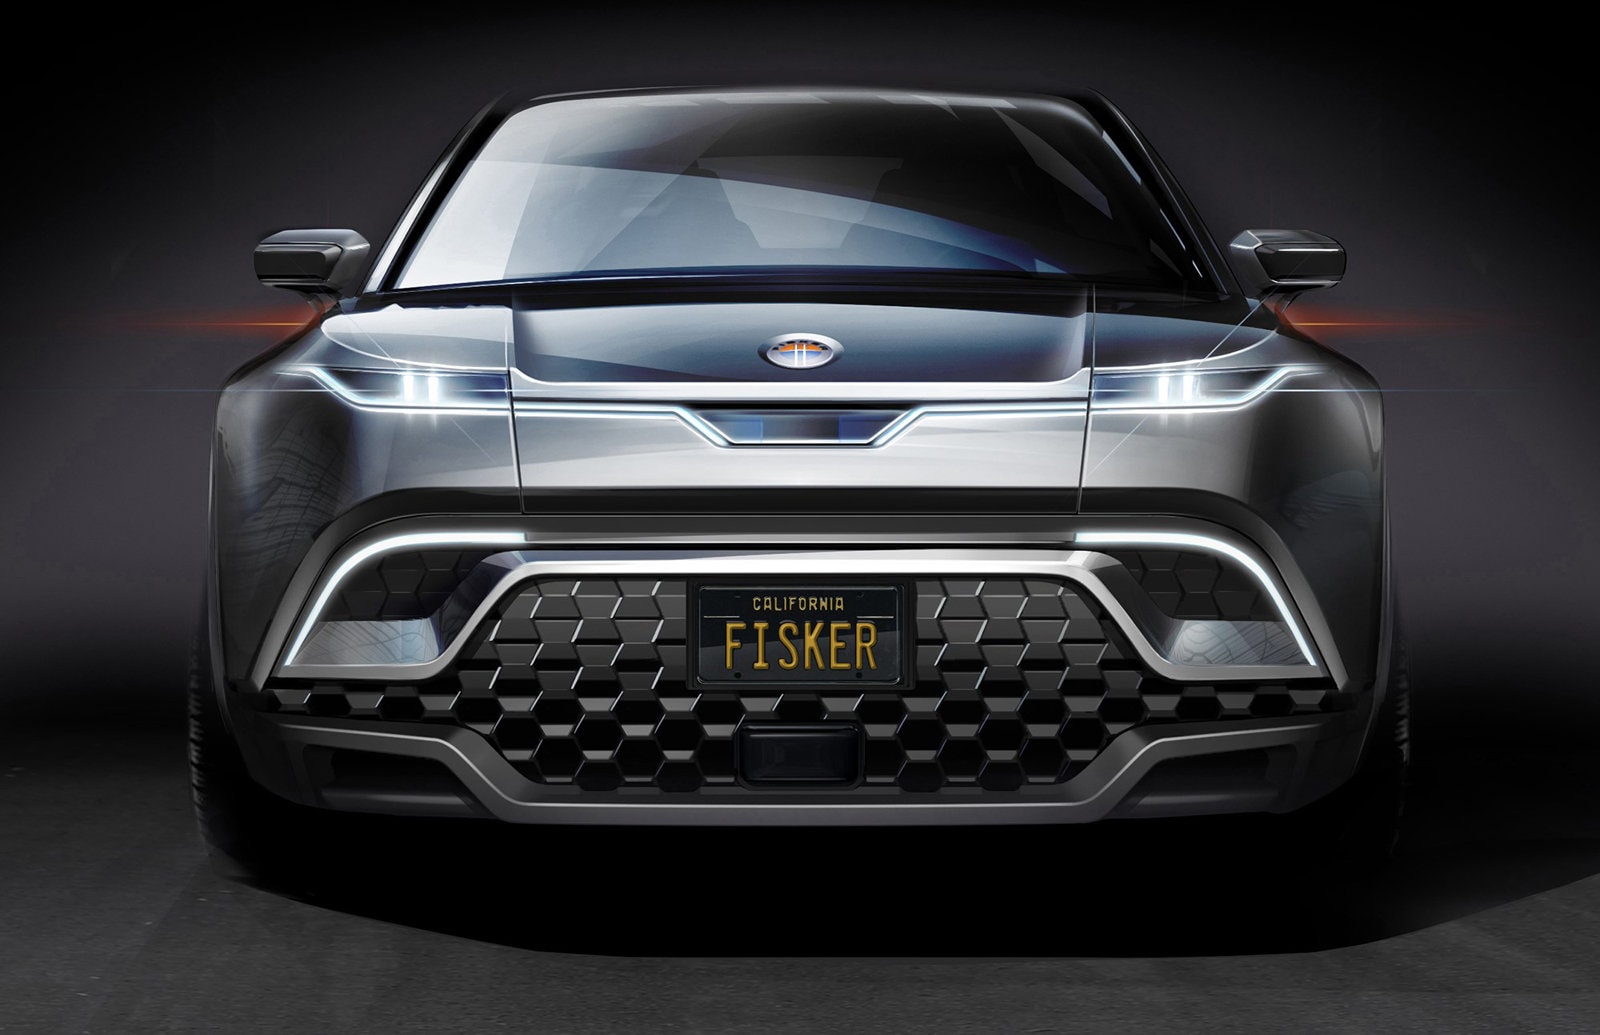 Fisker Electric SUV 2021 Plans Cars Info Information Details Cop Purchase Buy Tesla Competitor Prototype Mid Sized Family EV Car California 40000 Dollars 